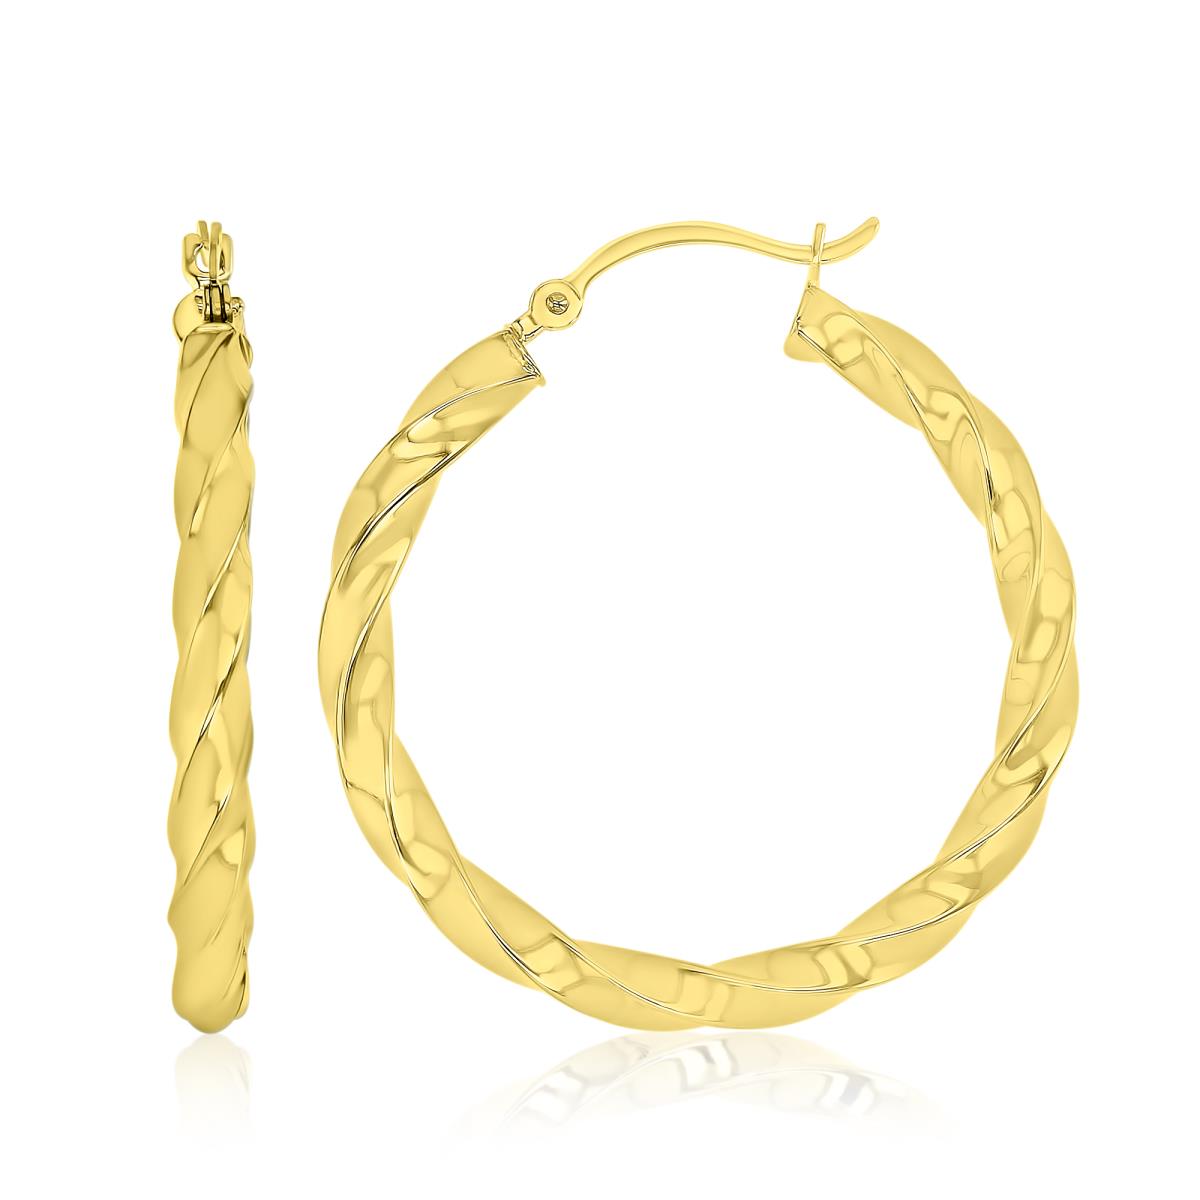 14K Yellow Gold 30MM Polished Spiral Hoop Earrings